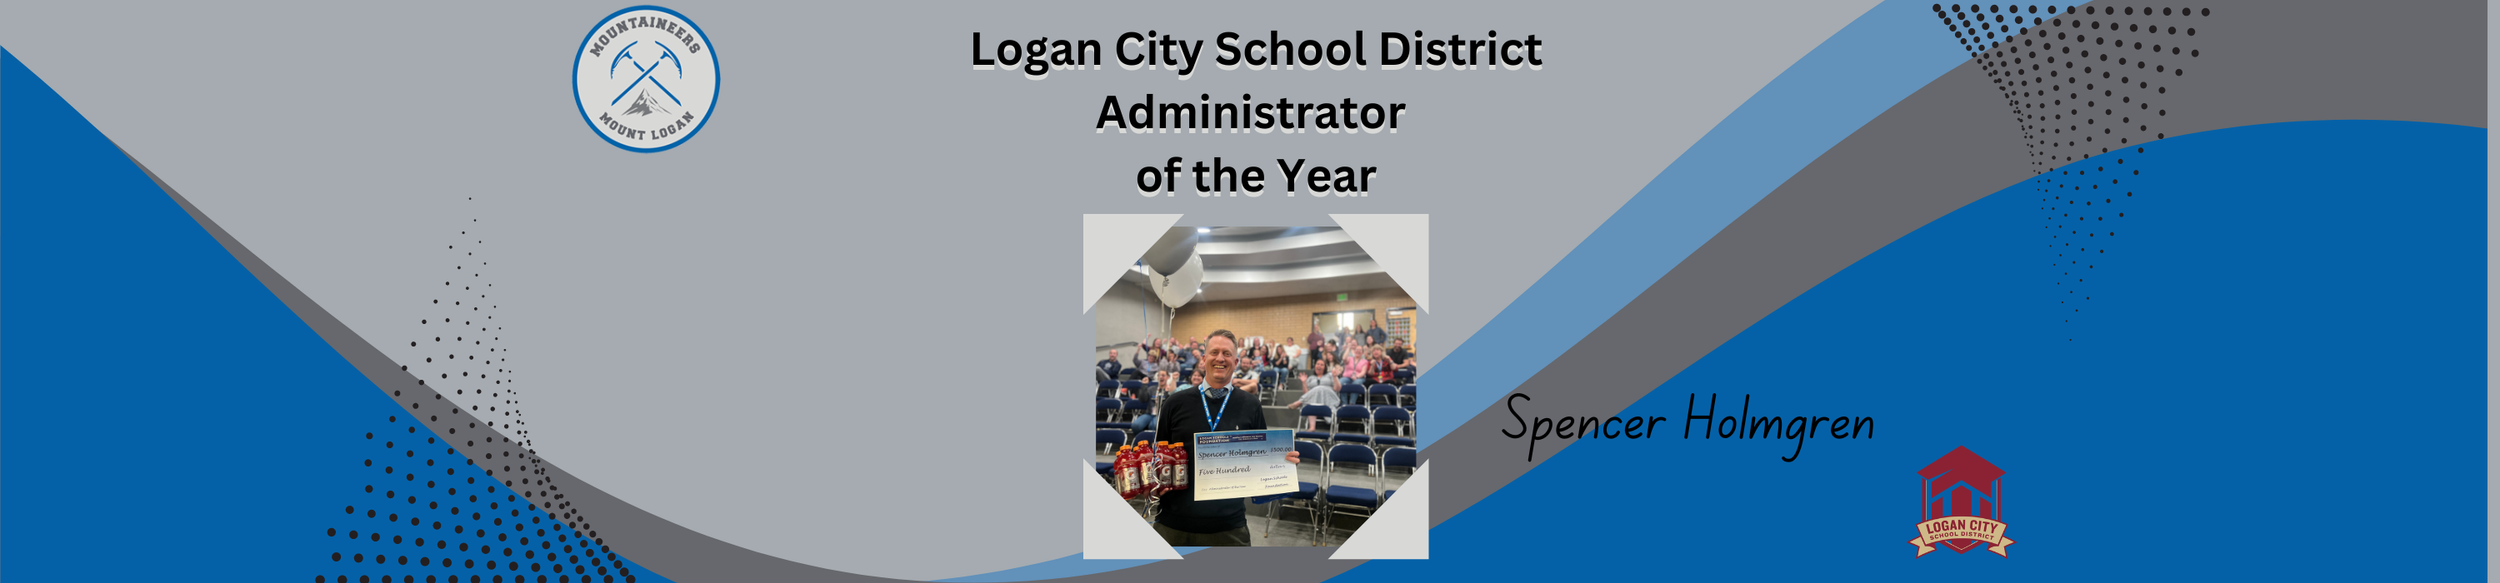 Logan City School District Administrator of the Year (3000 x 700 px).png